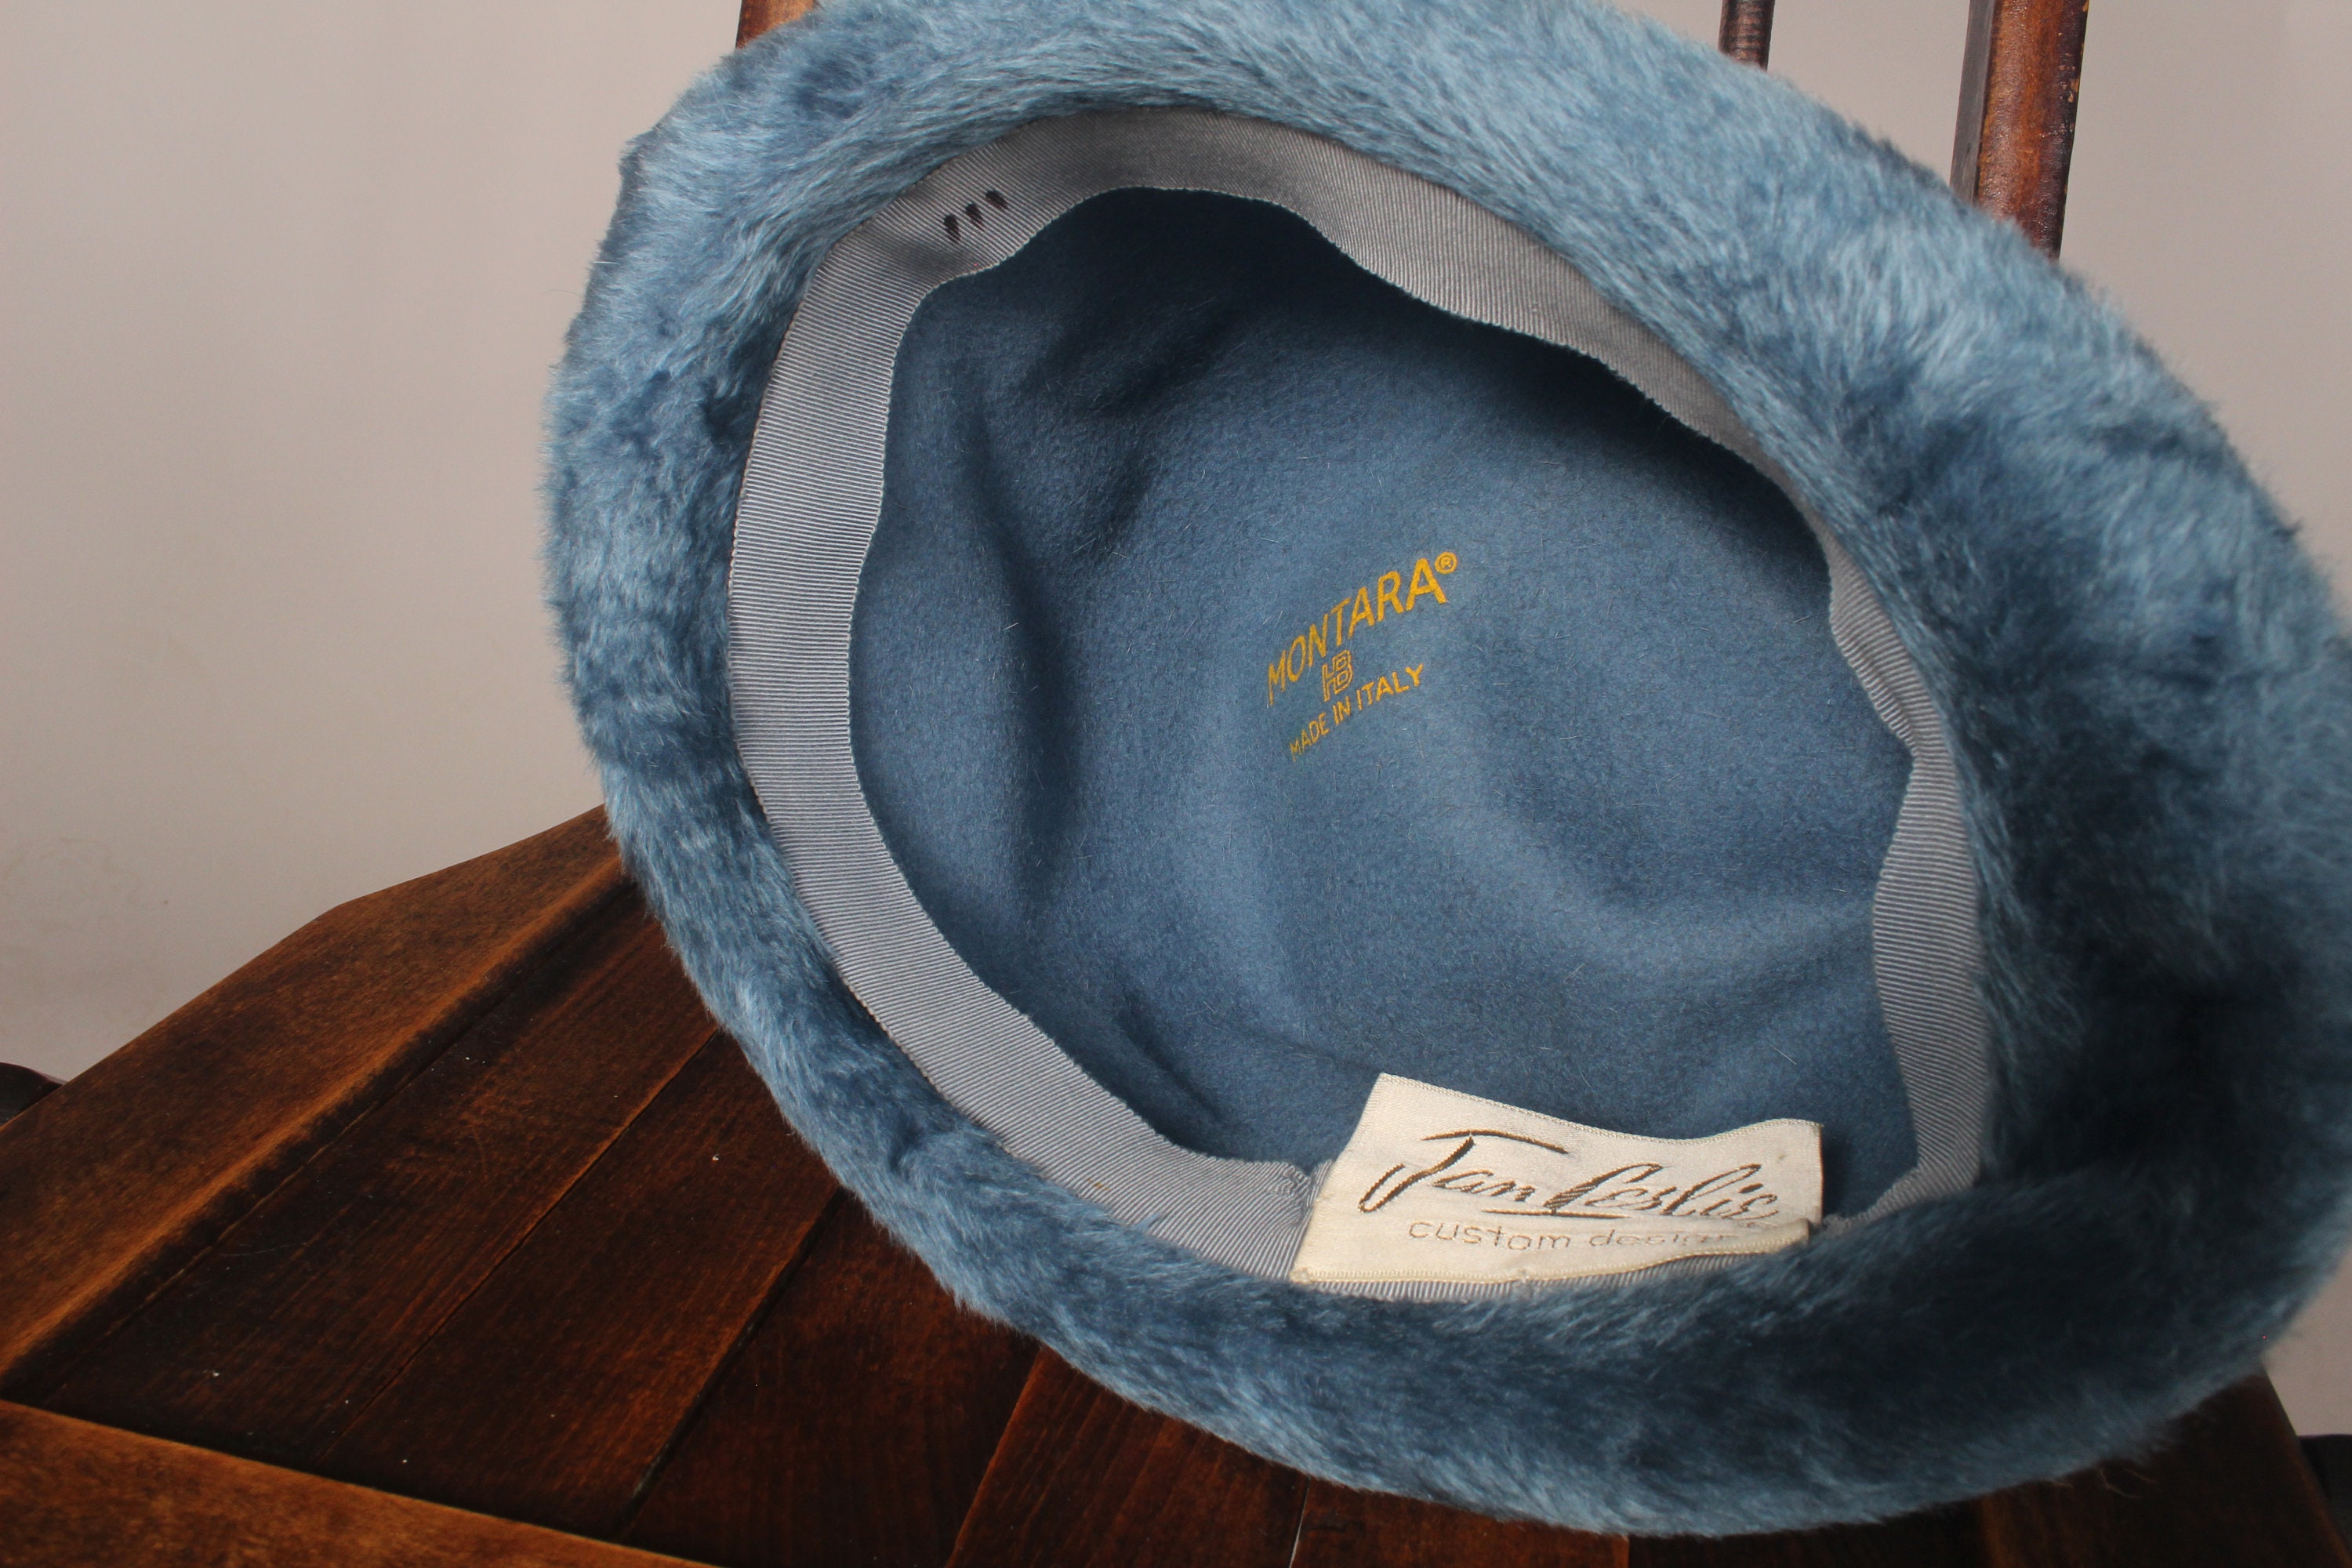 Vintage 60s Blue Faux Fur Unisex Hat with Brocade Accent by Jan Leslie Montara made in Italy